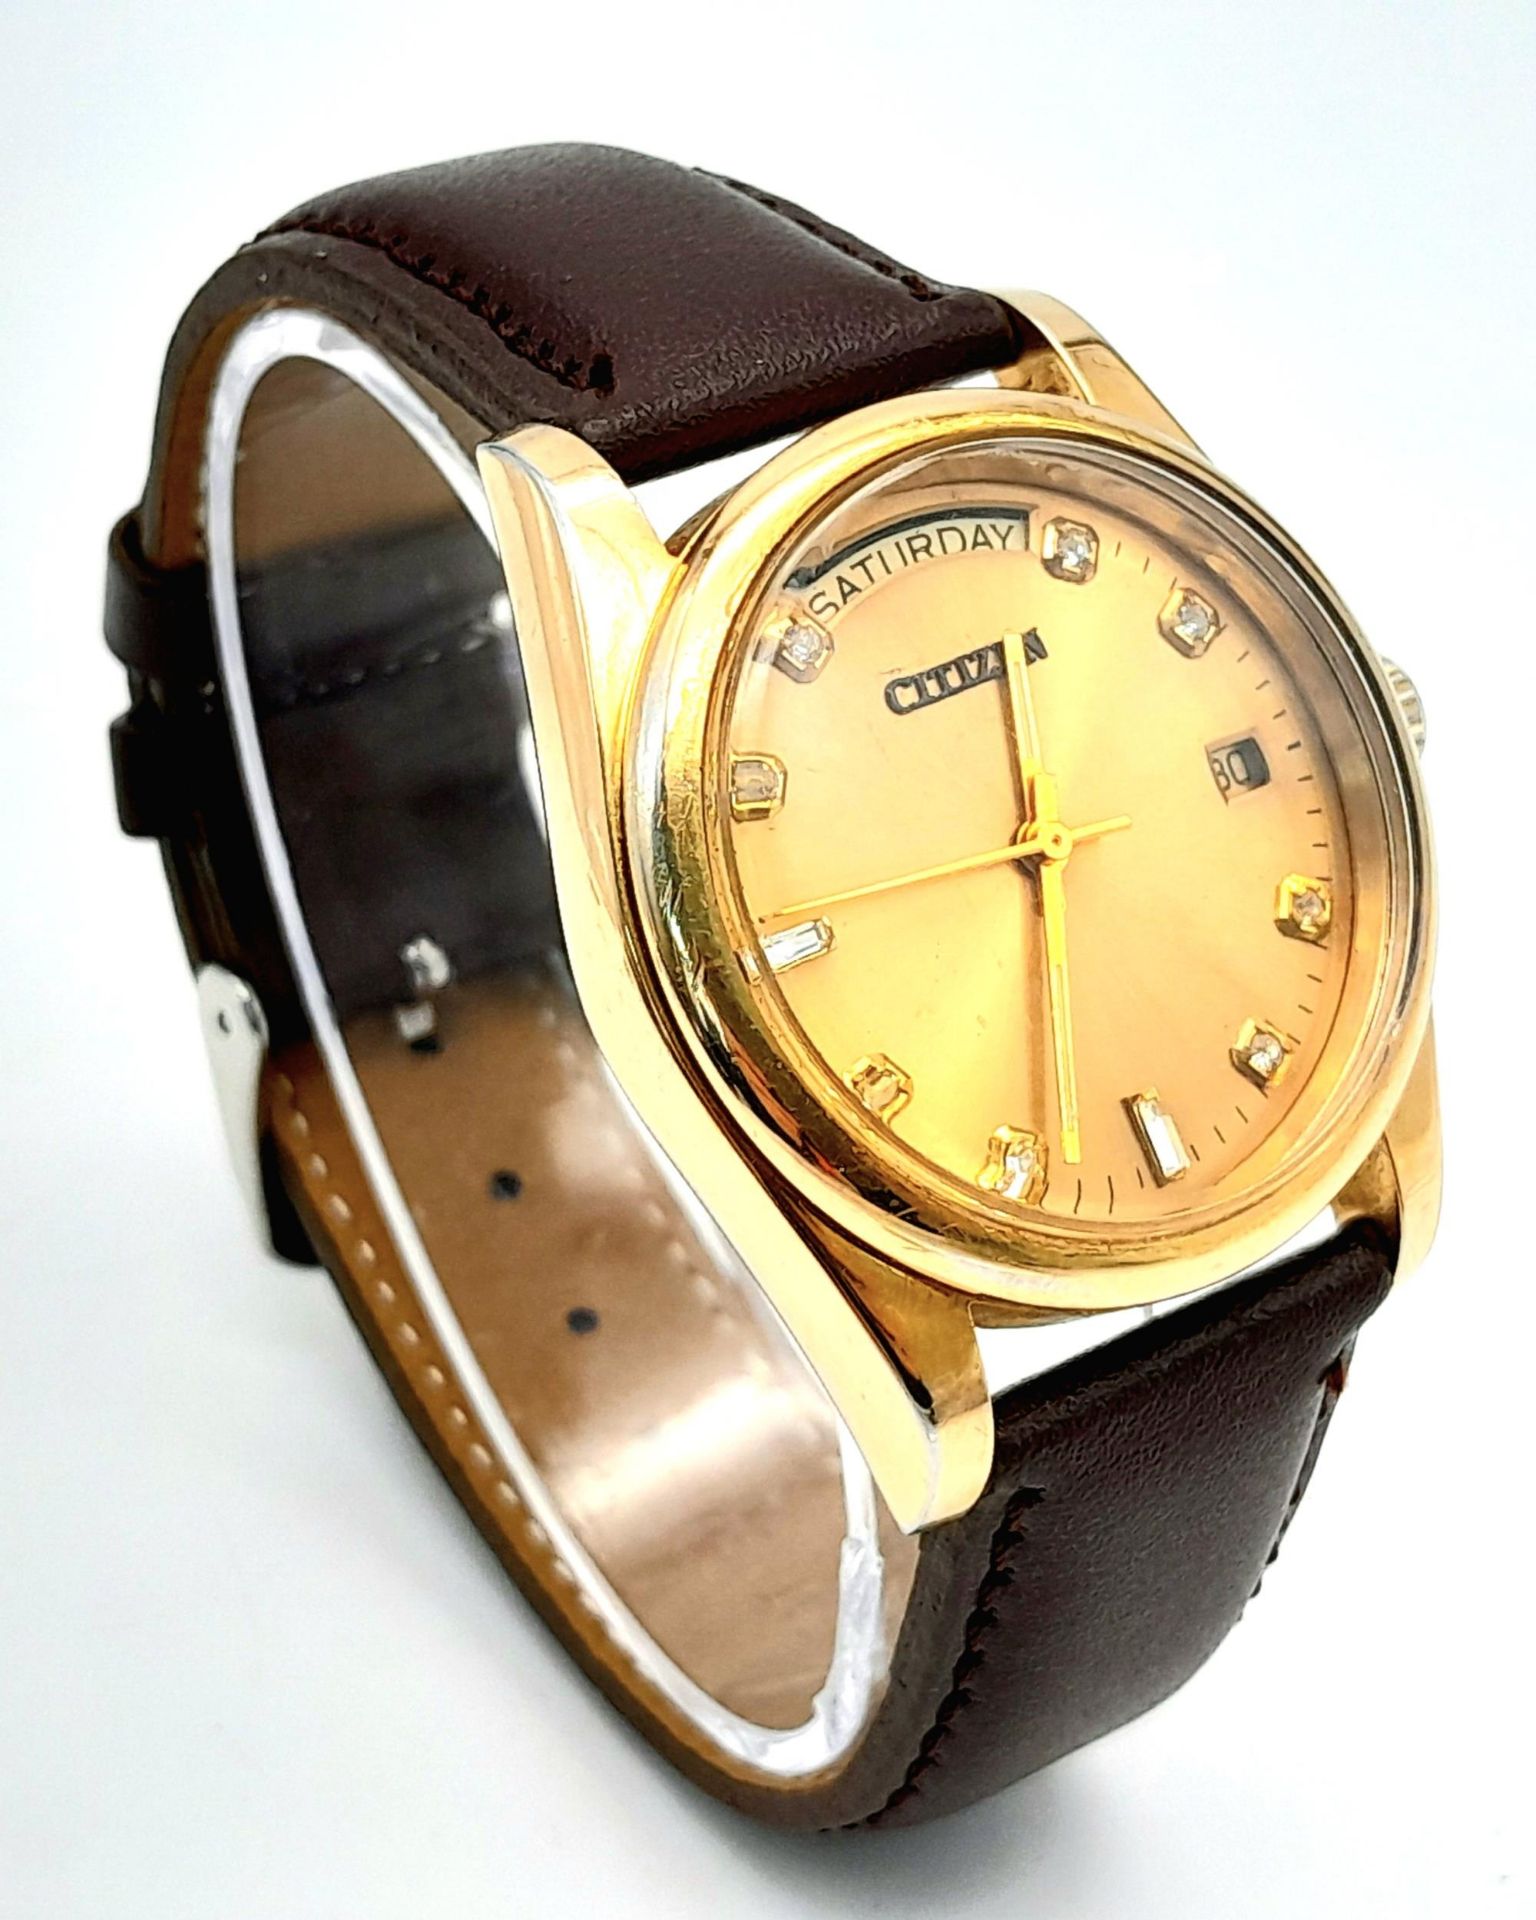 A Citizen Automatic Stone Set Watch. Brown leather strap. Gold plated case - 36mm. Gold tone dial - Image 3 of 6